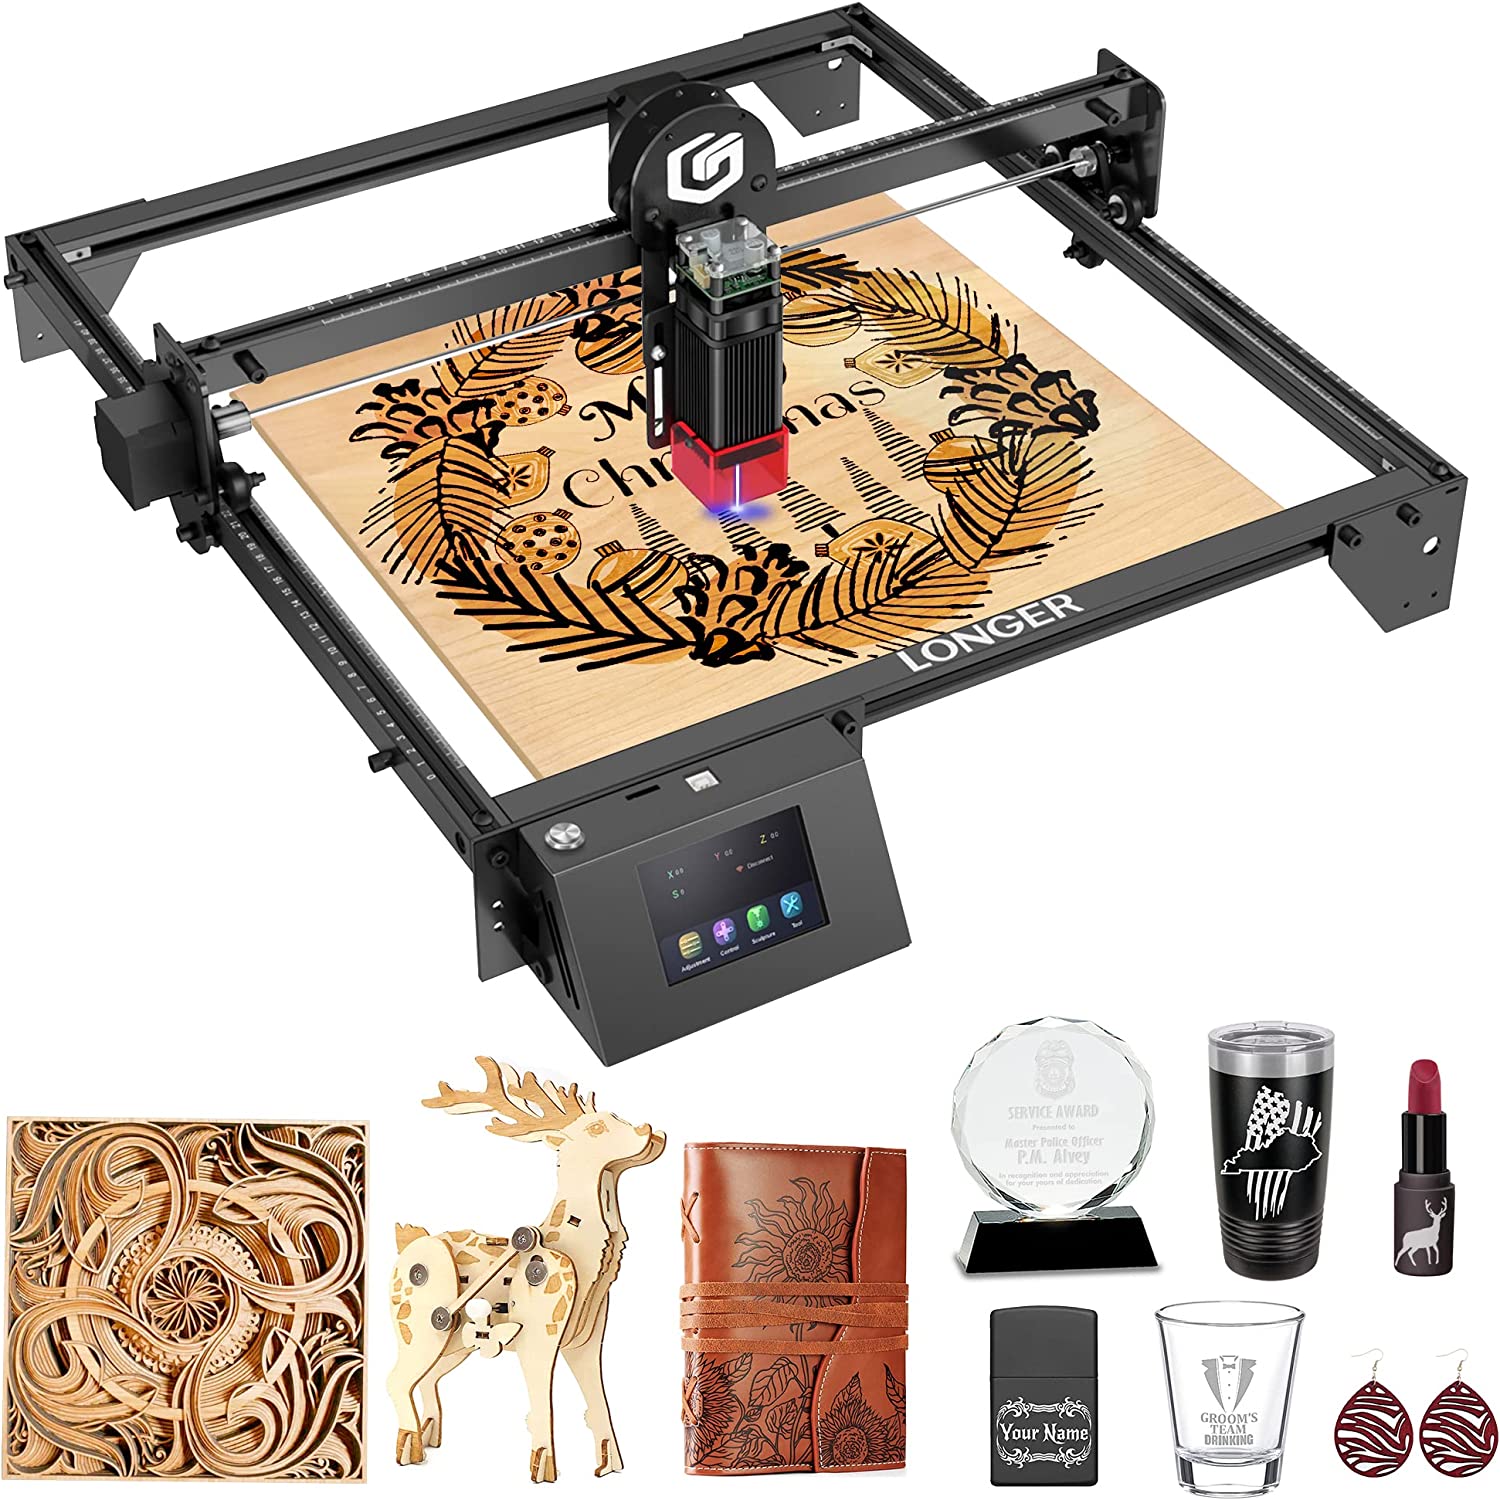  LONGER RAY5 10W Laser Engraver and Cutter+ Laser